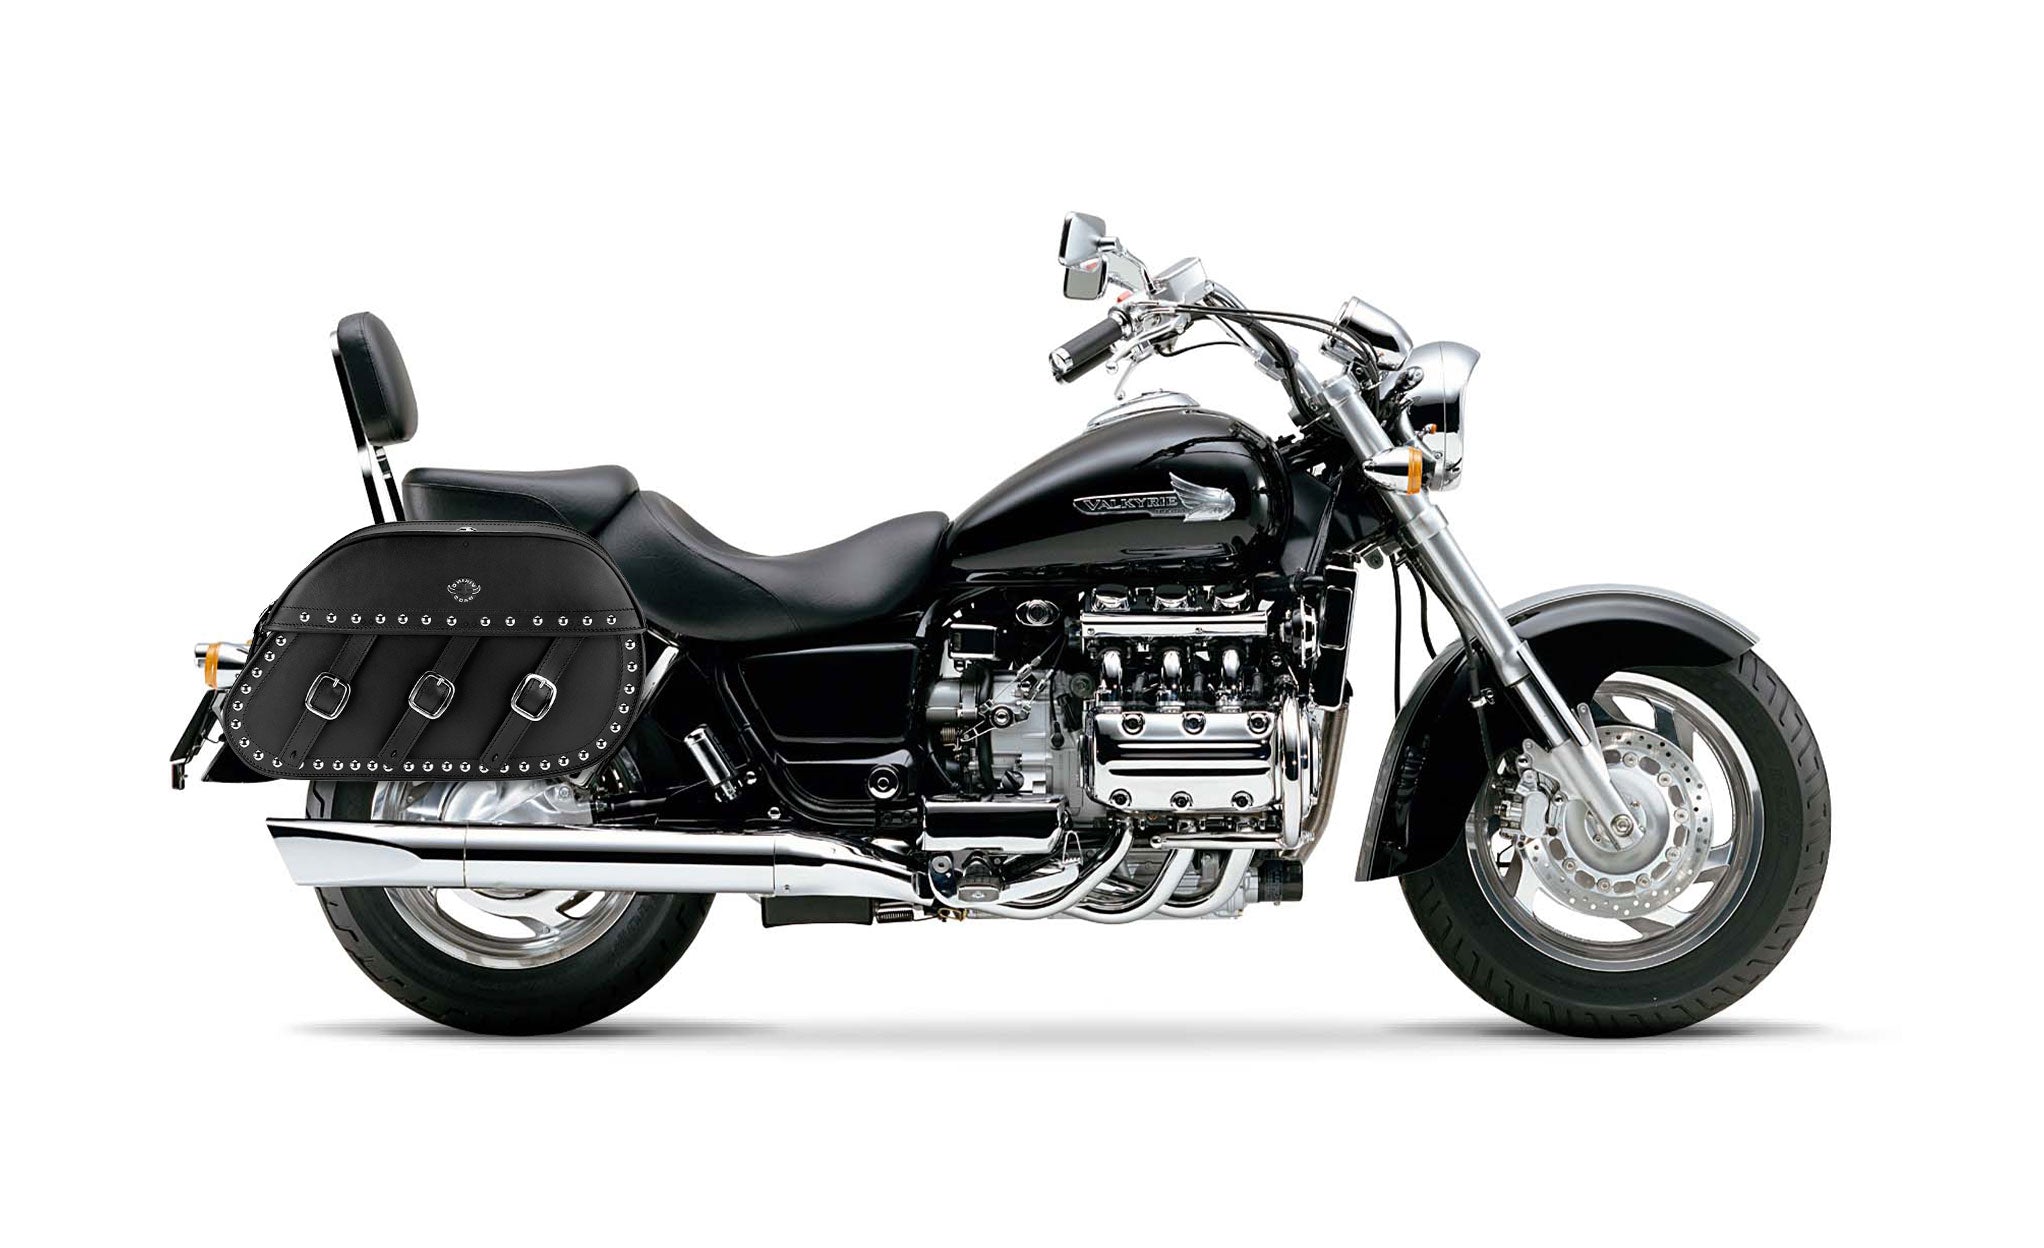 34L - Trianon Extra Large Honda Valkyrie 1500 Standard Studded Leather Motorcycle Saddlebags on Bike Photo @expand